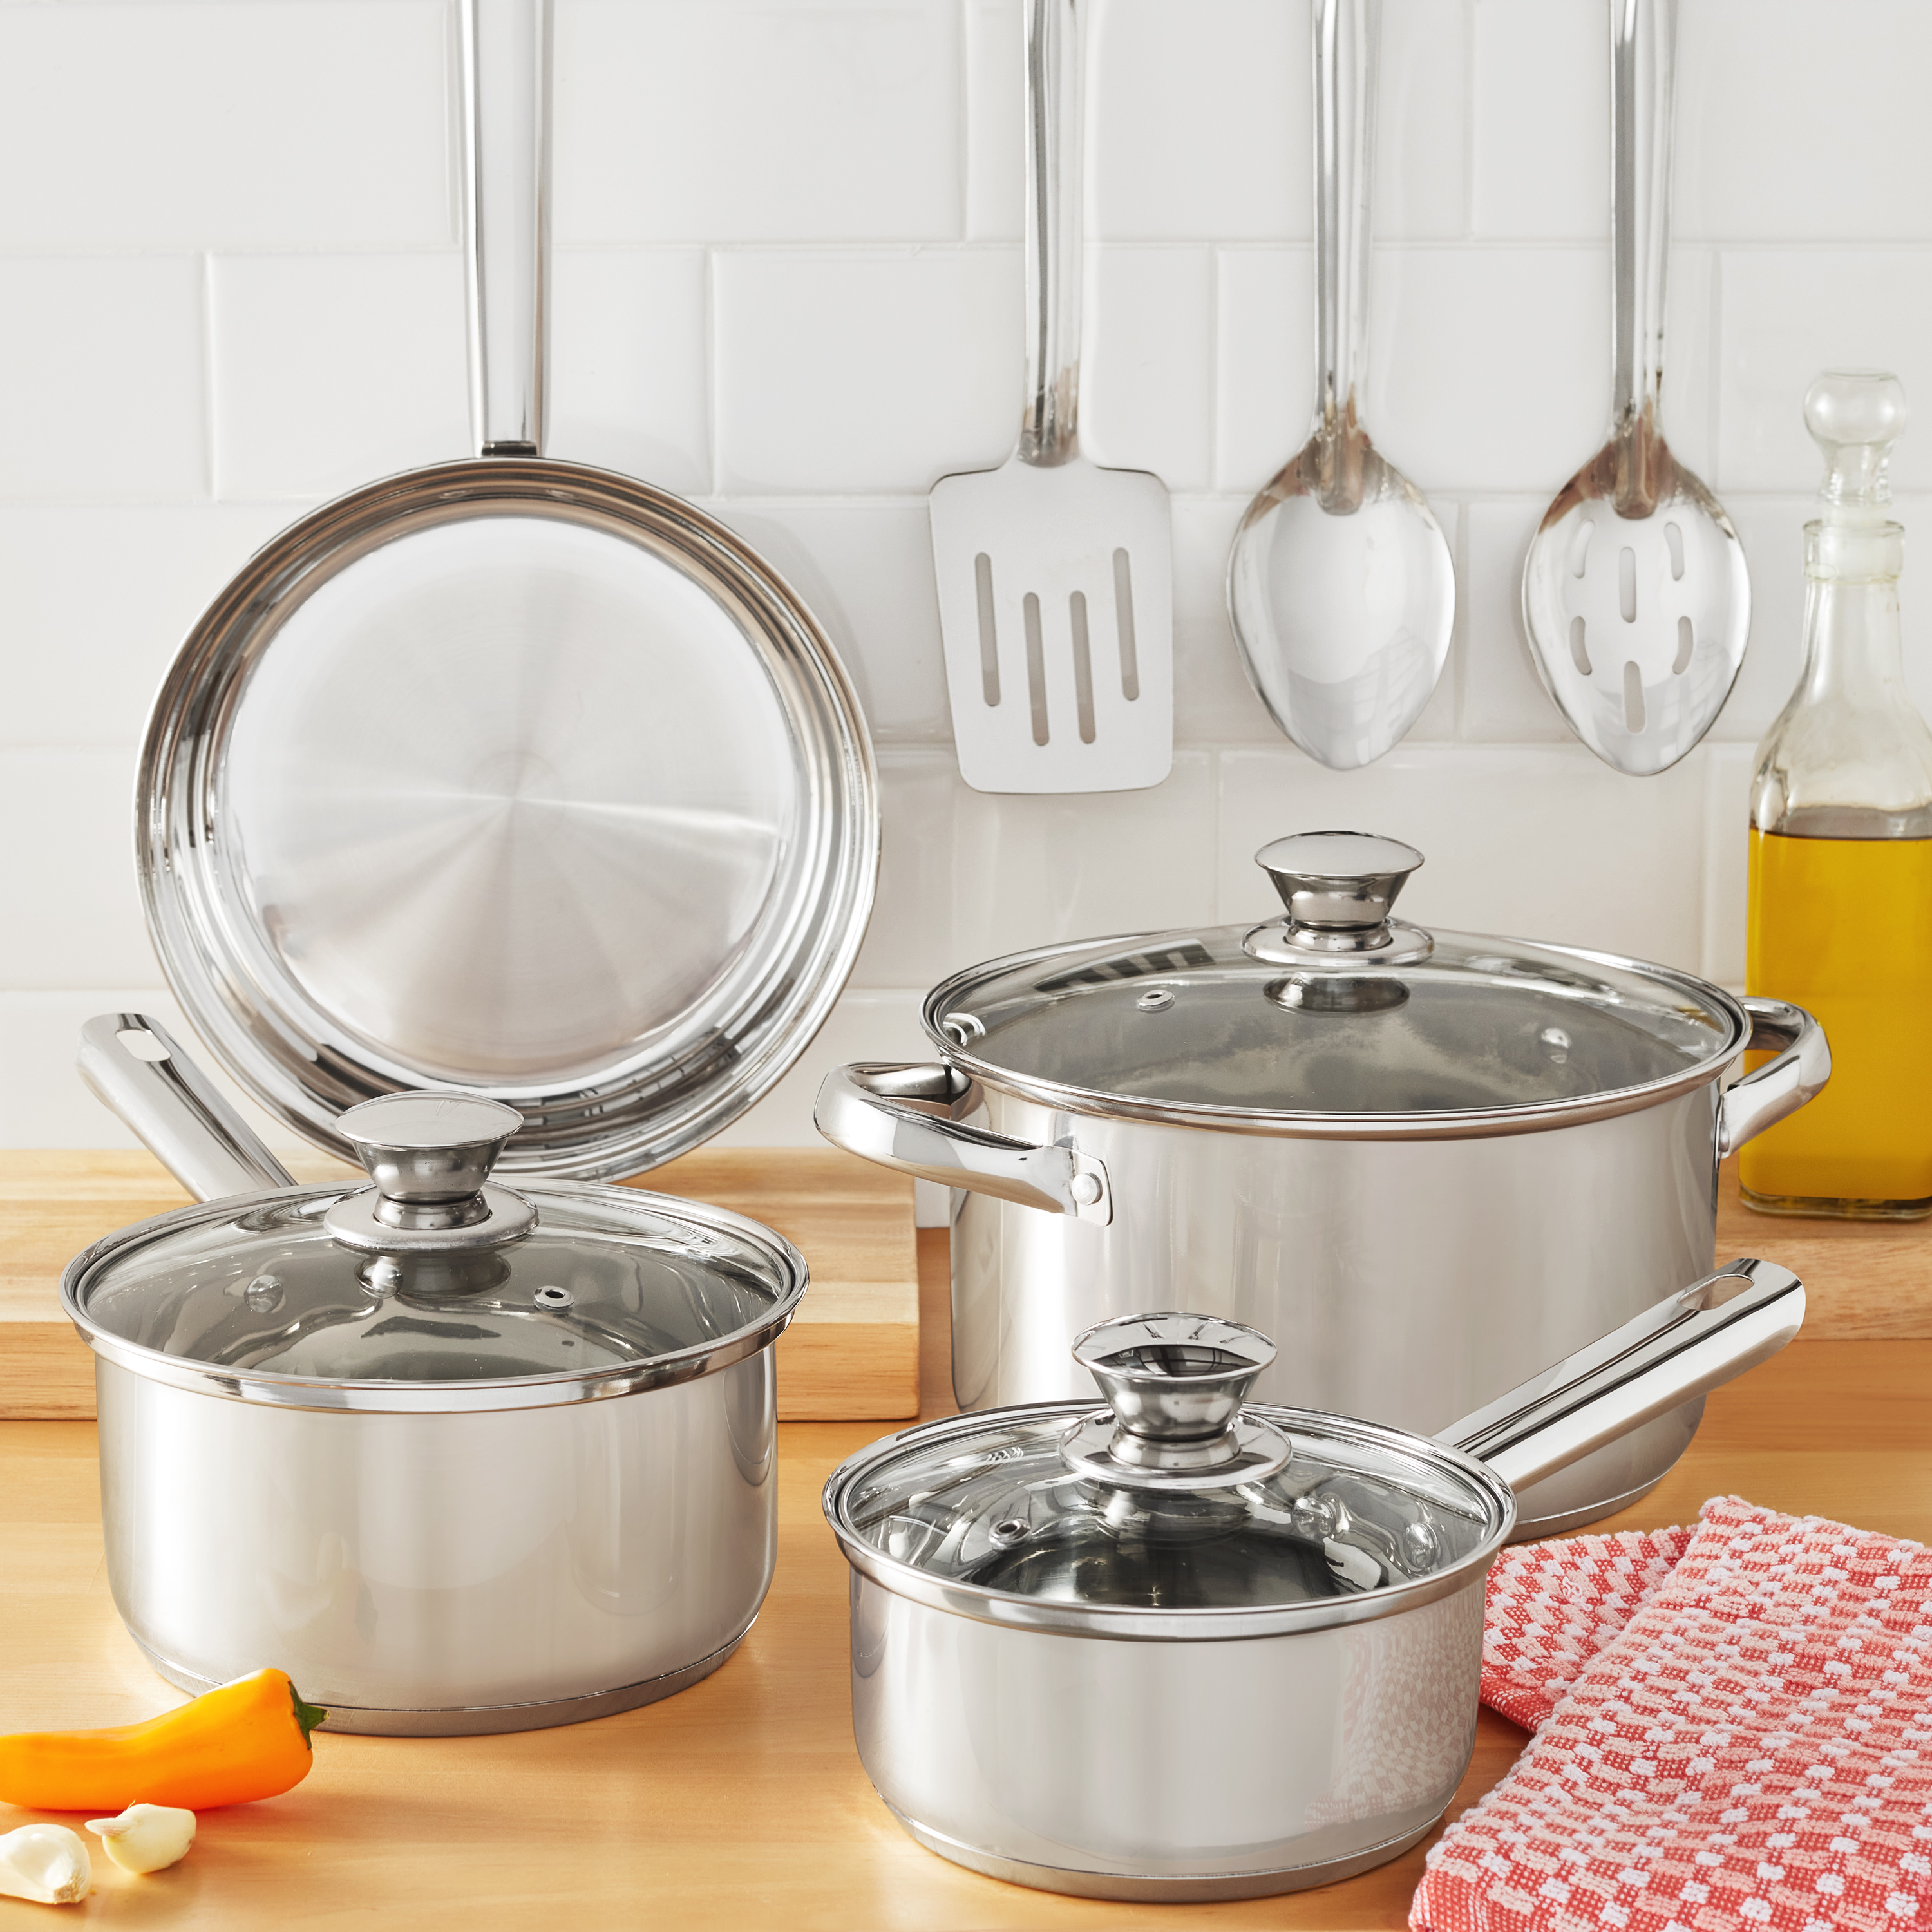 Mainstays Stainless Steel 10-Piece Cookware Set - image 3 of 8